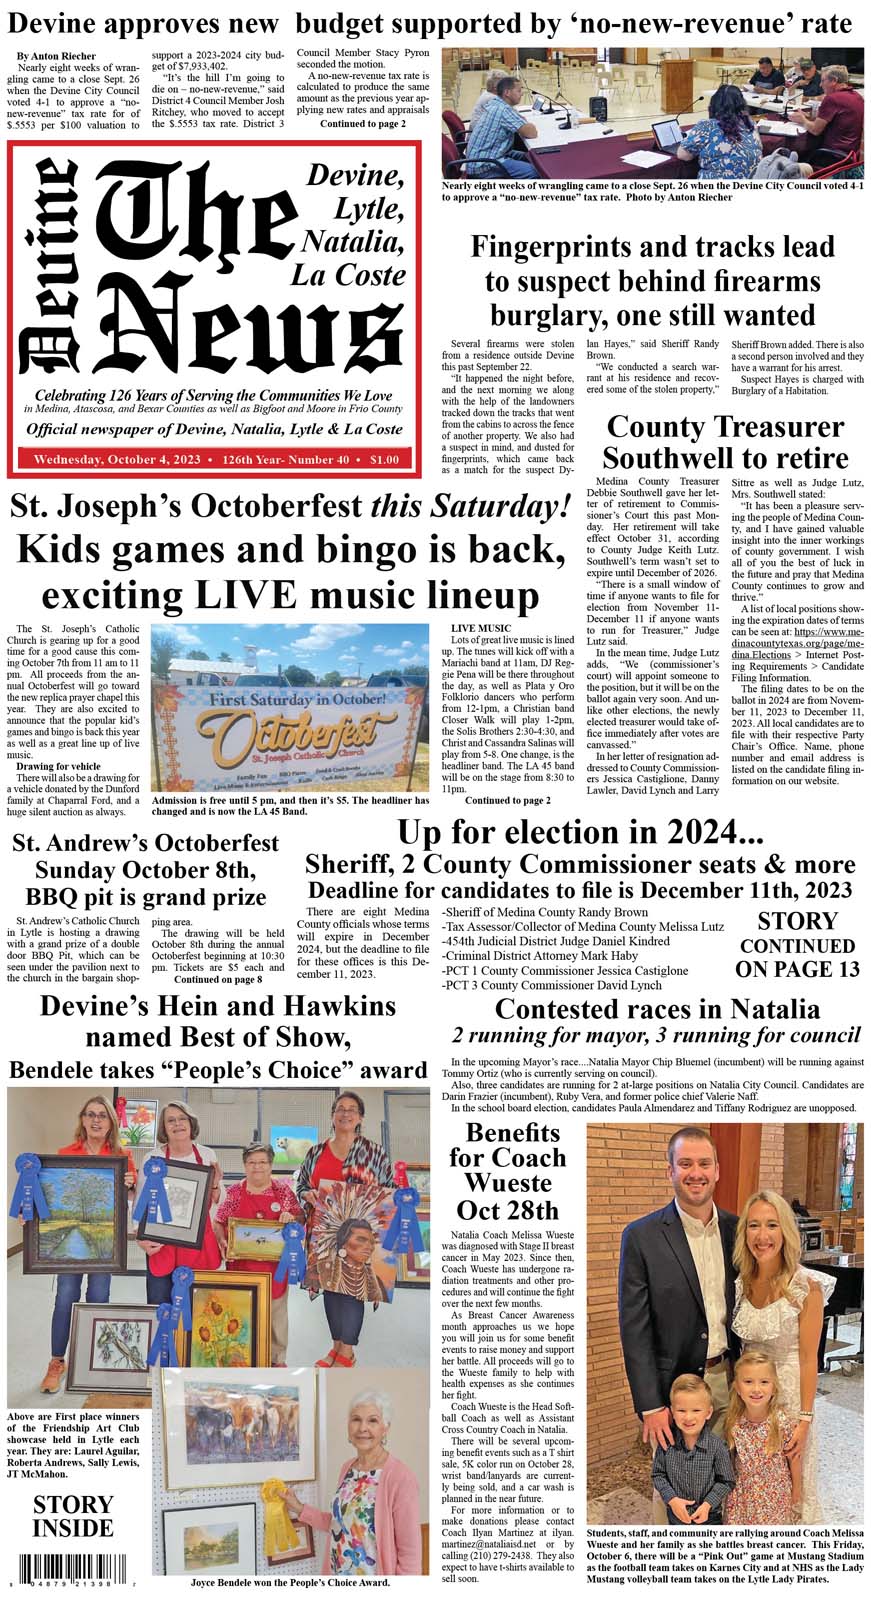 Devine News E-dition Available Online Now!